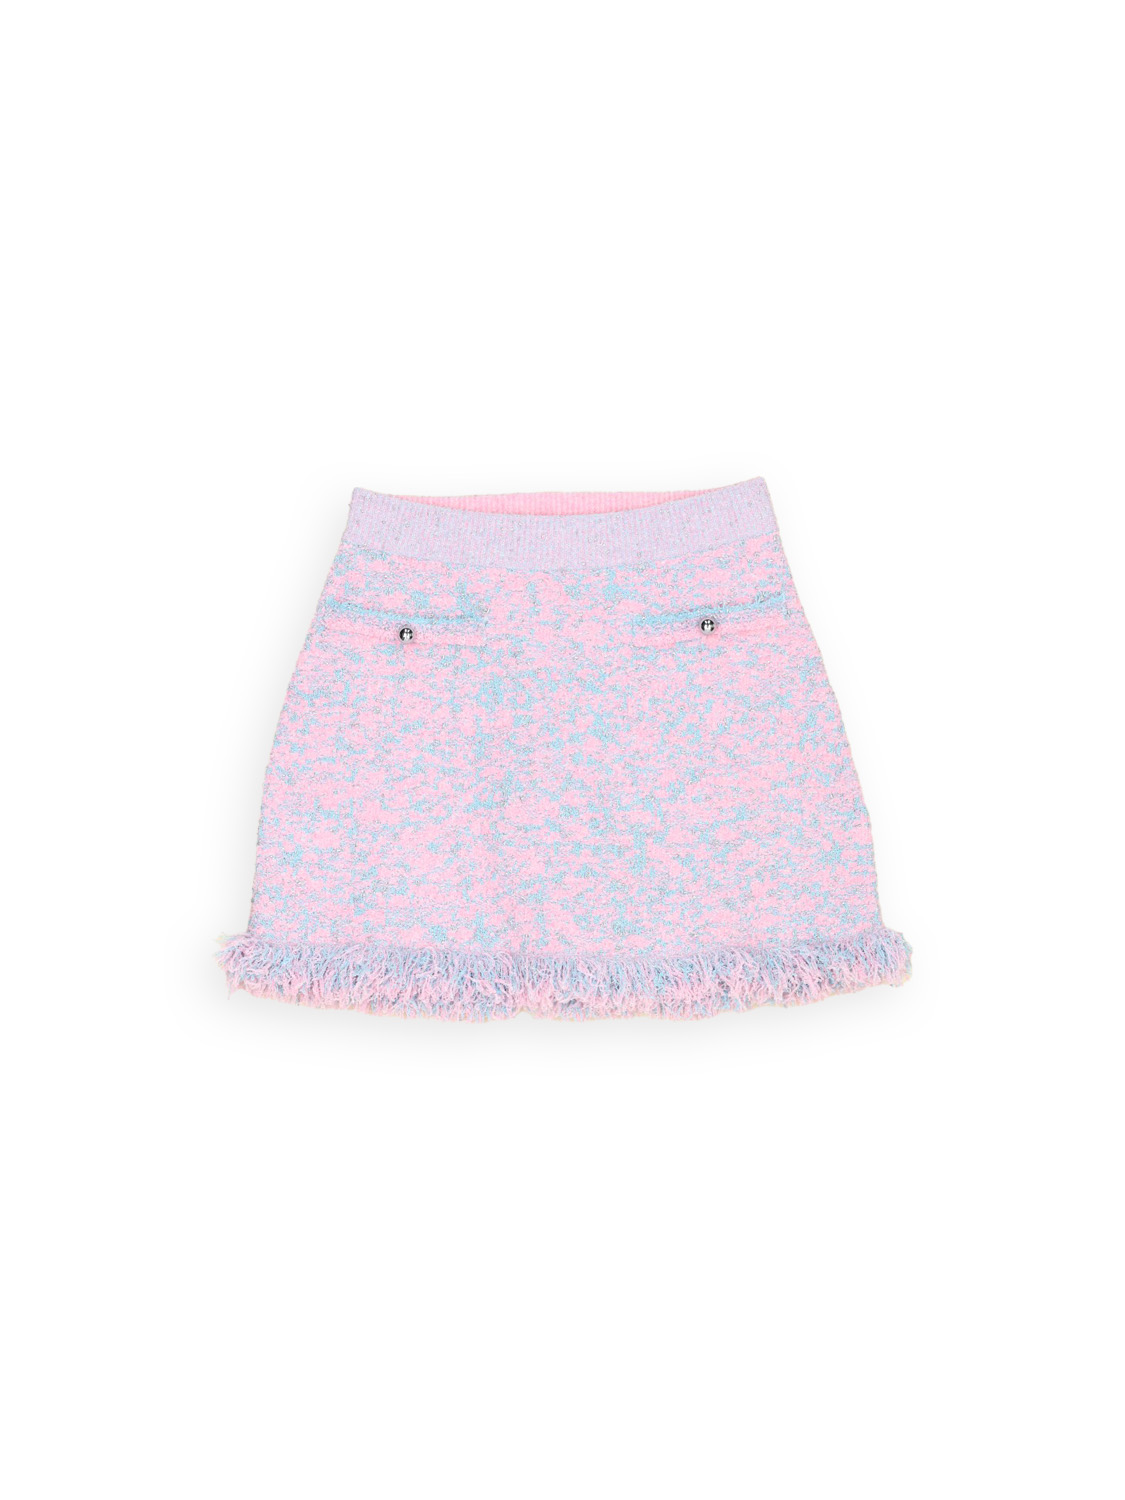 rabanne Skirt in boucle look   pink S